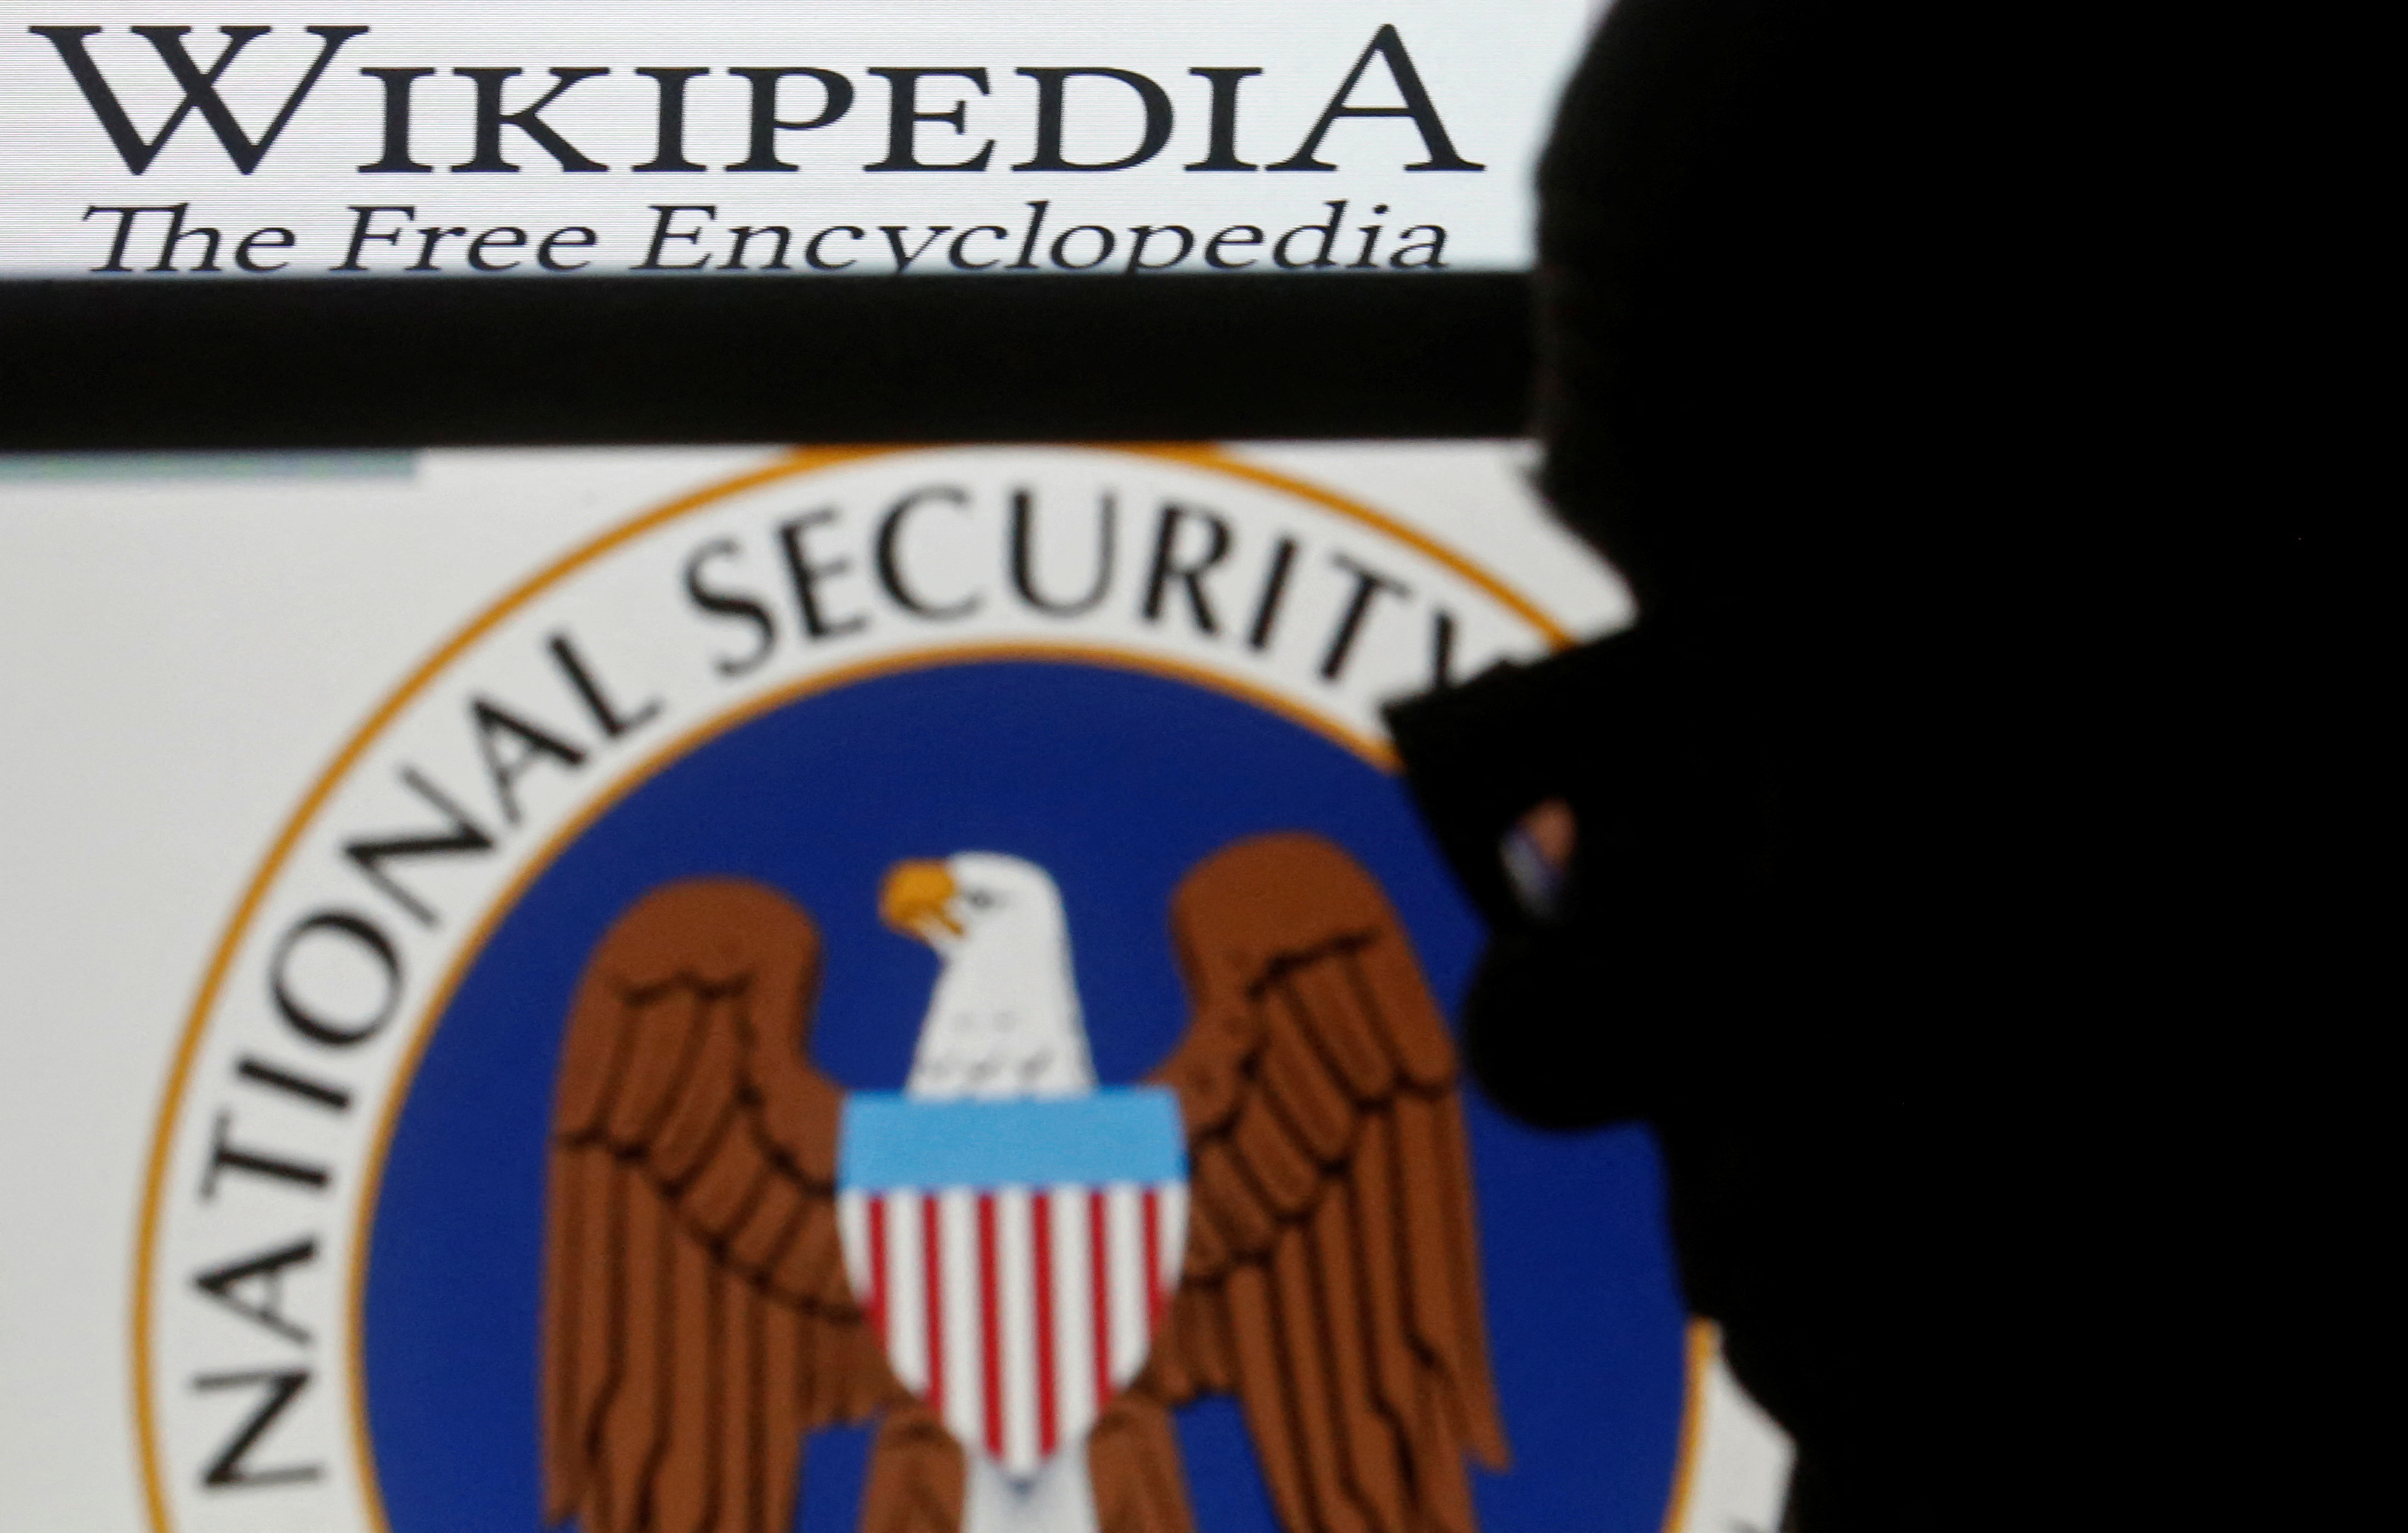 A man is silhouetted near logos of the U.S. National Security Agency (NSA) and Wikipedia in this photo illustration taken in Sarajevo